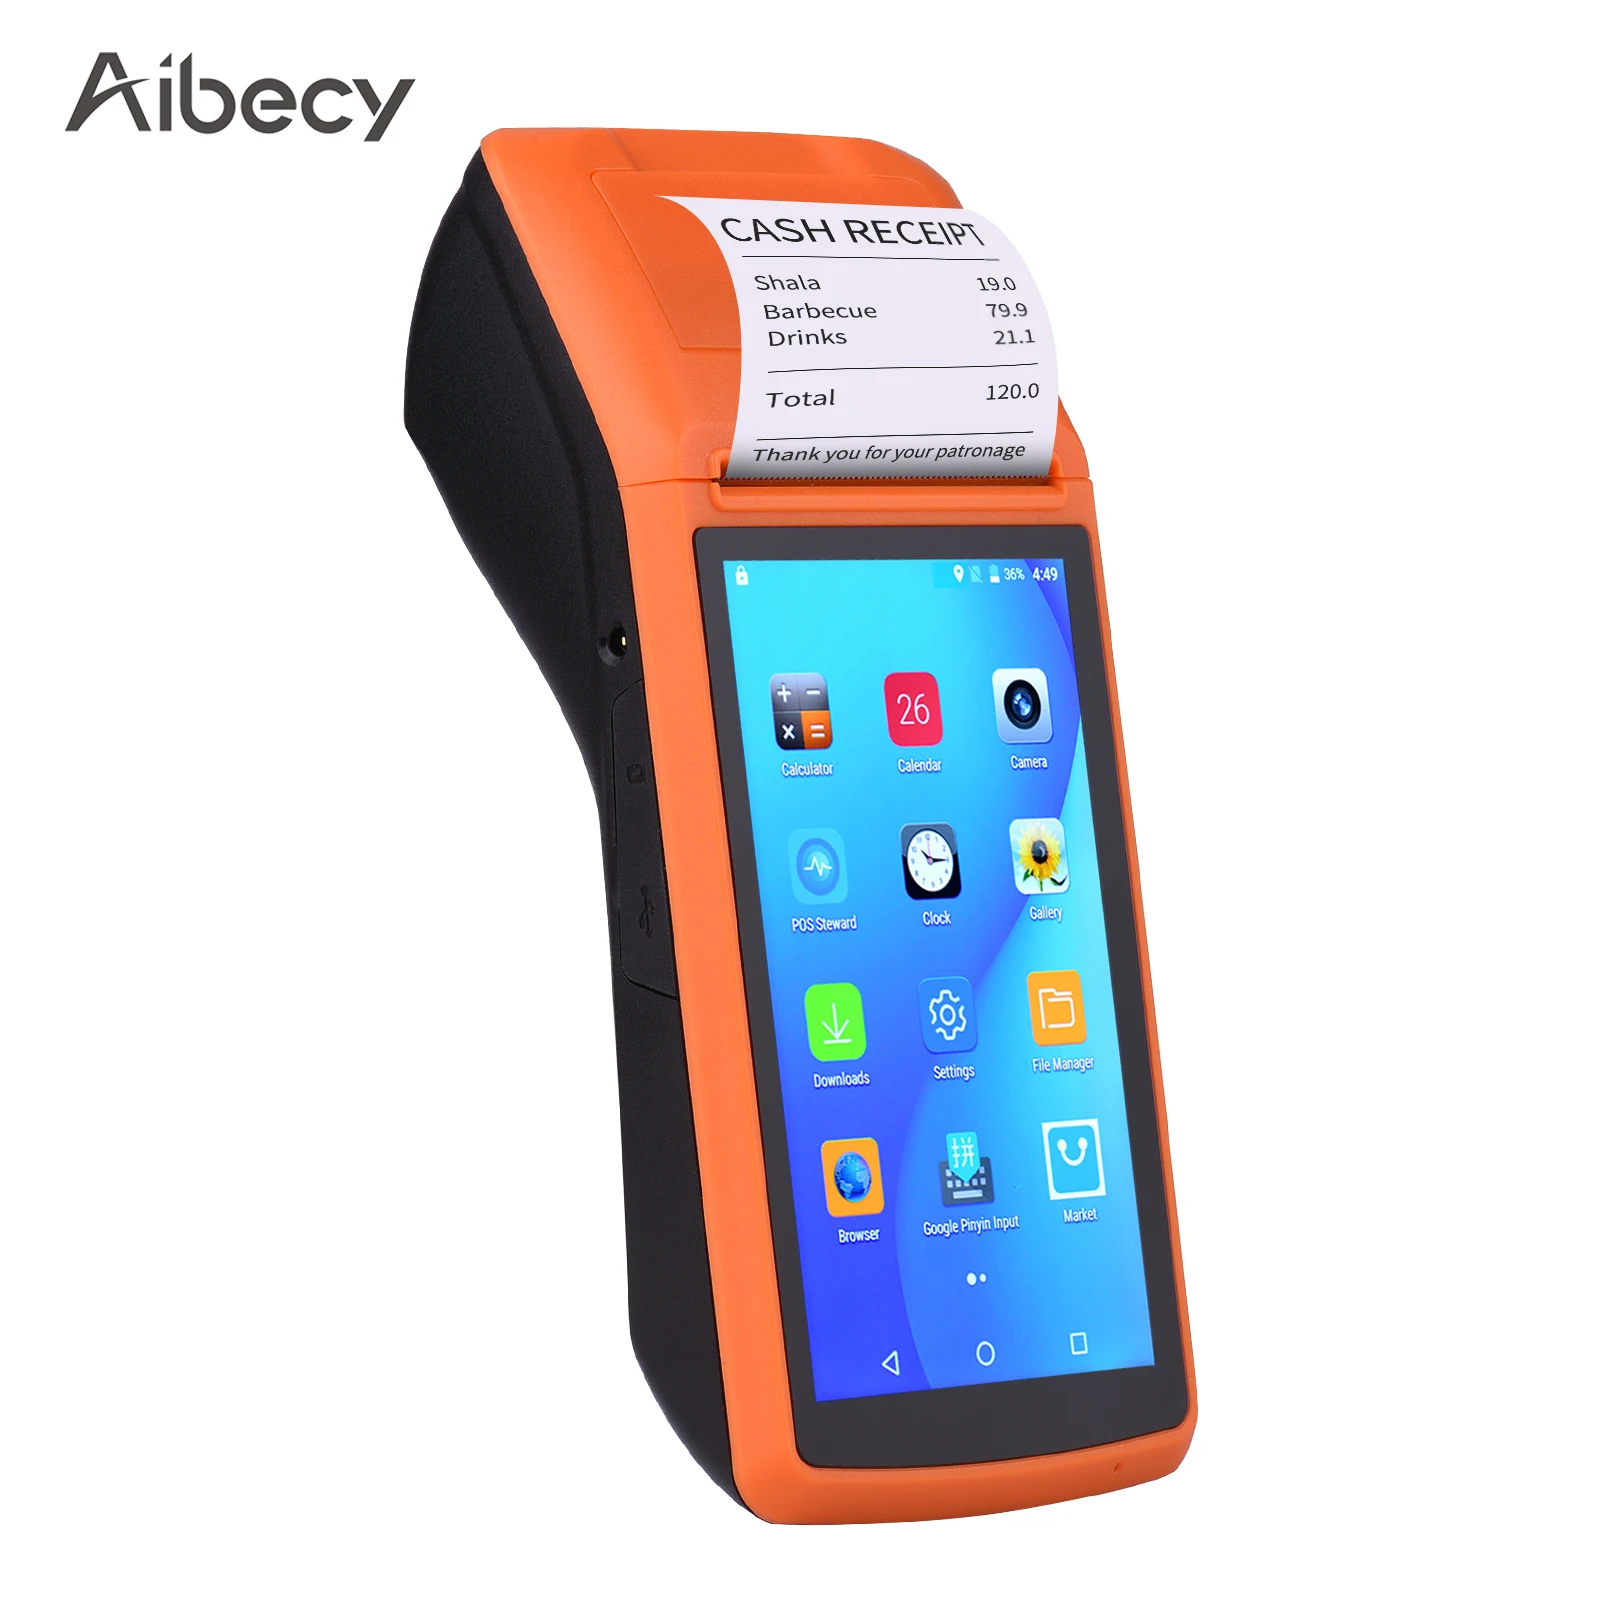 Aibecy All in One Handheld PDA Printer Smart POS Terminal Wireless Portable Printers Intelligent Payment Terminal Function BT/WiFi/USB OTG/ 3G Communication